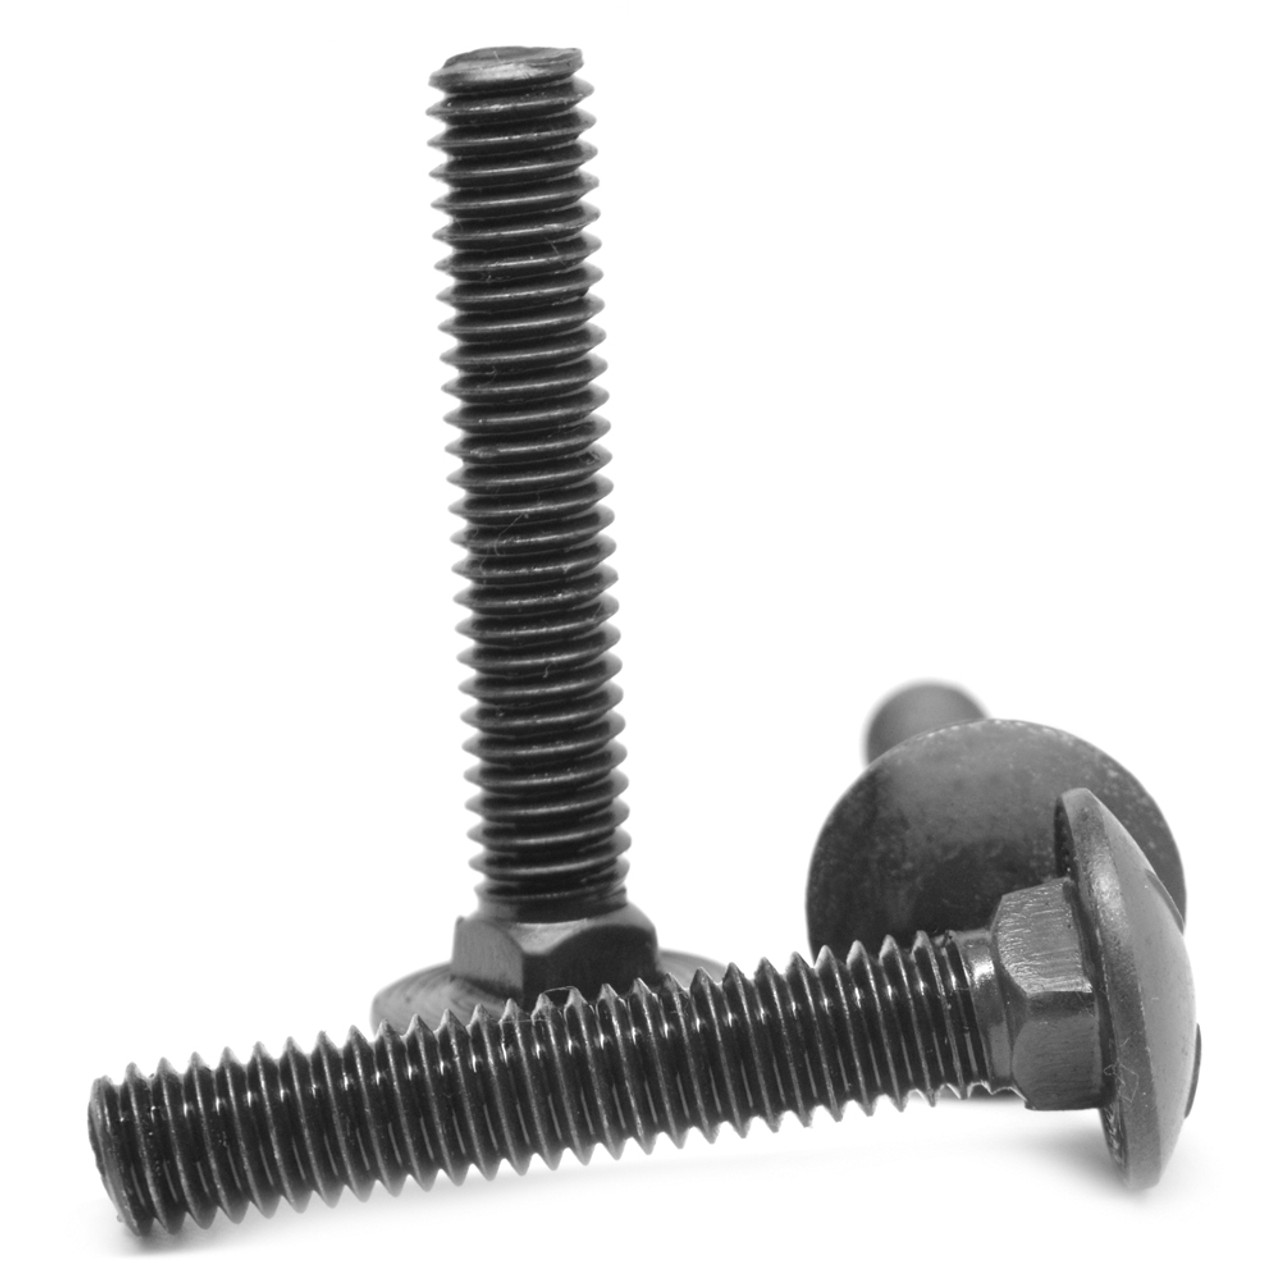 5/8-11 x 10 (FT) Coarse Thread Grade 8 Carriage Bolt Alloy Steel Thermal Black Oxide